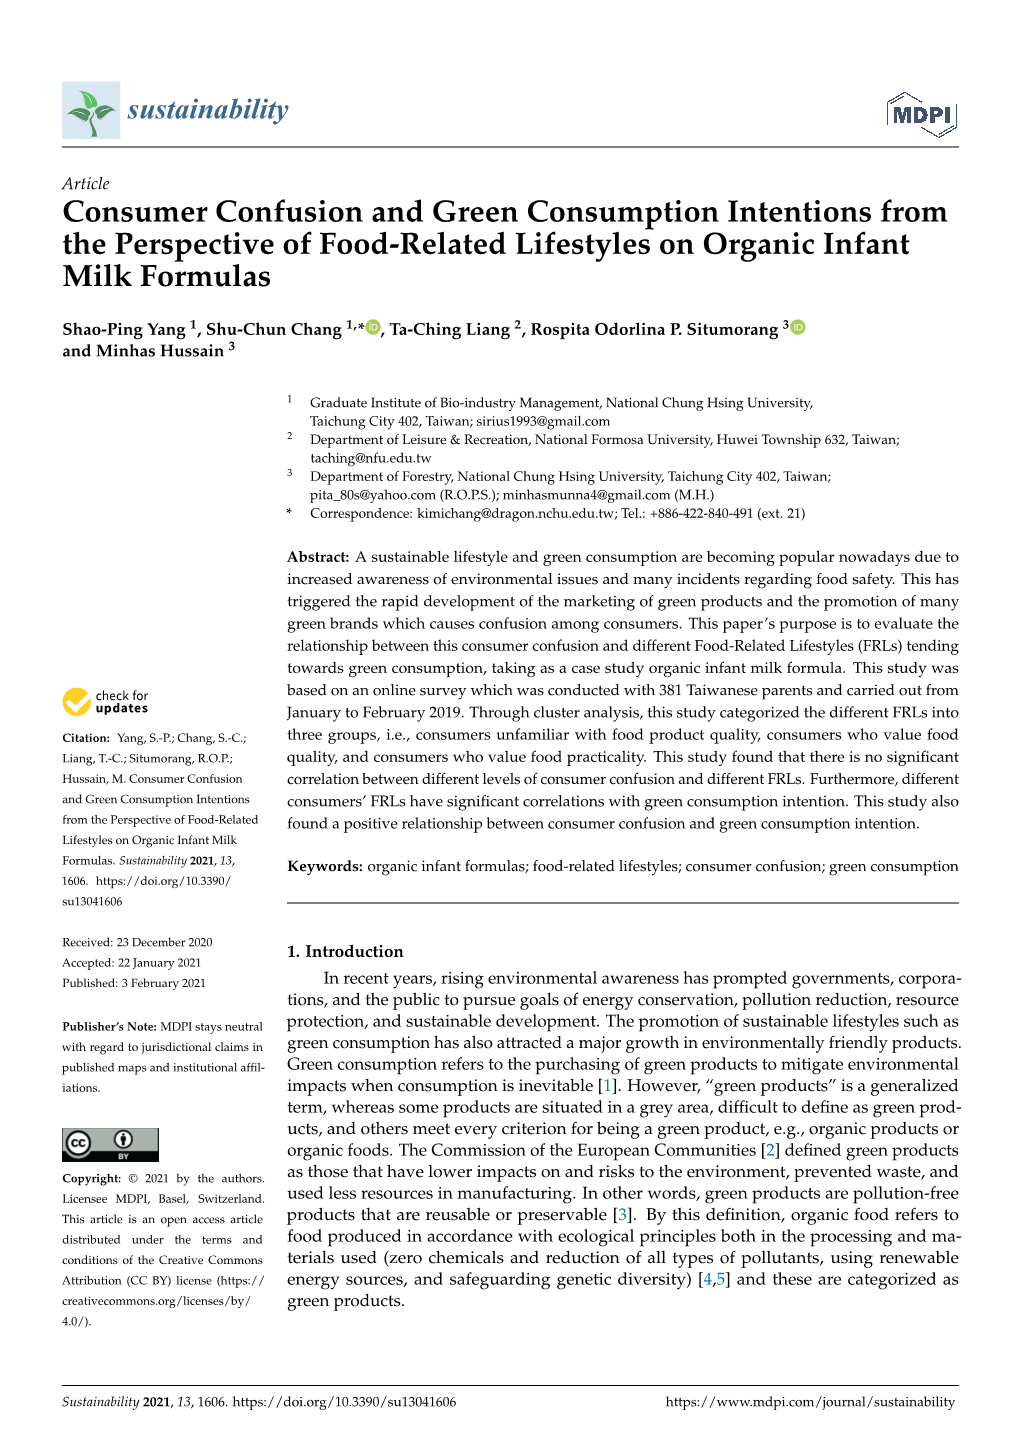 Consumer Confusion and Green Consumption Intentions from the Perspective of Food-Related Lifestyles on Organic Infant Milk Formulas